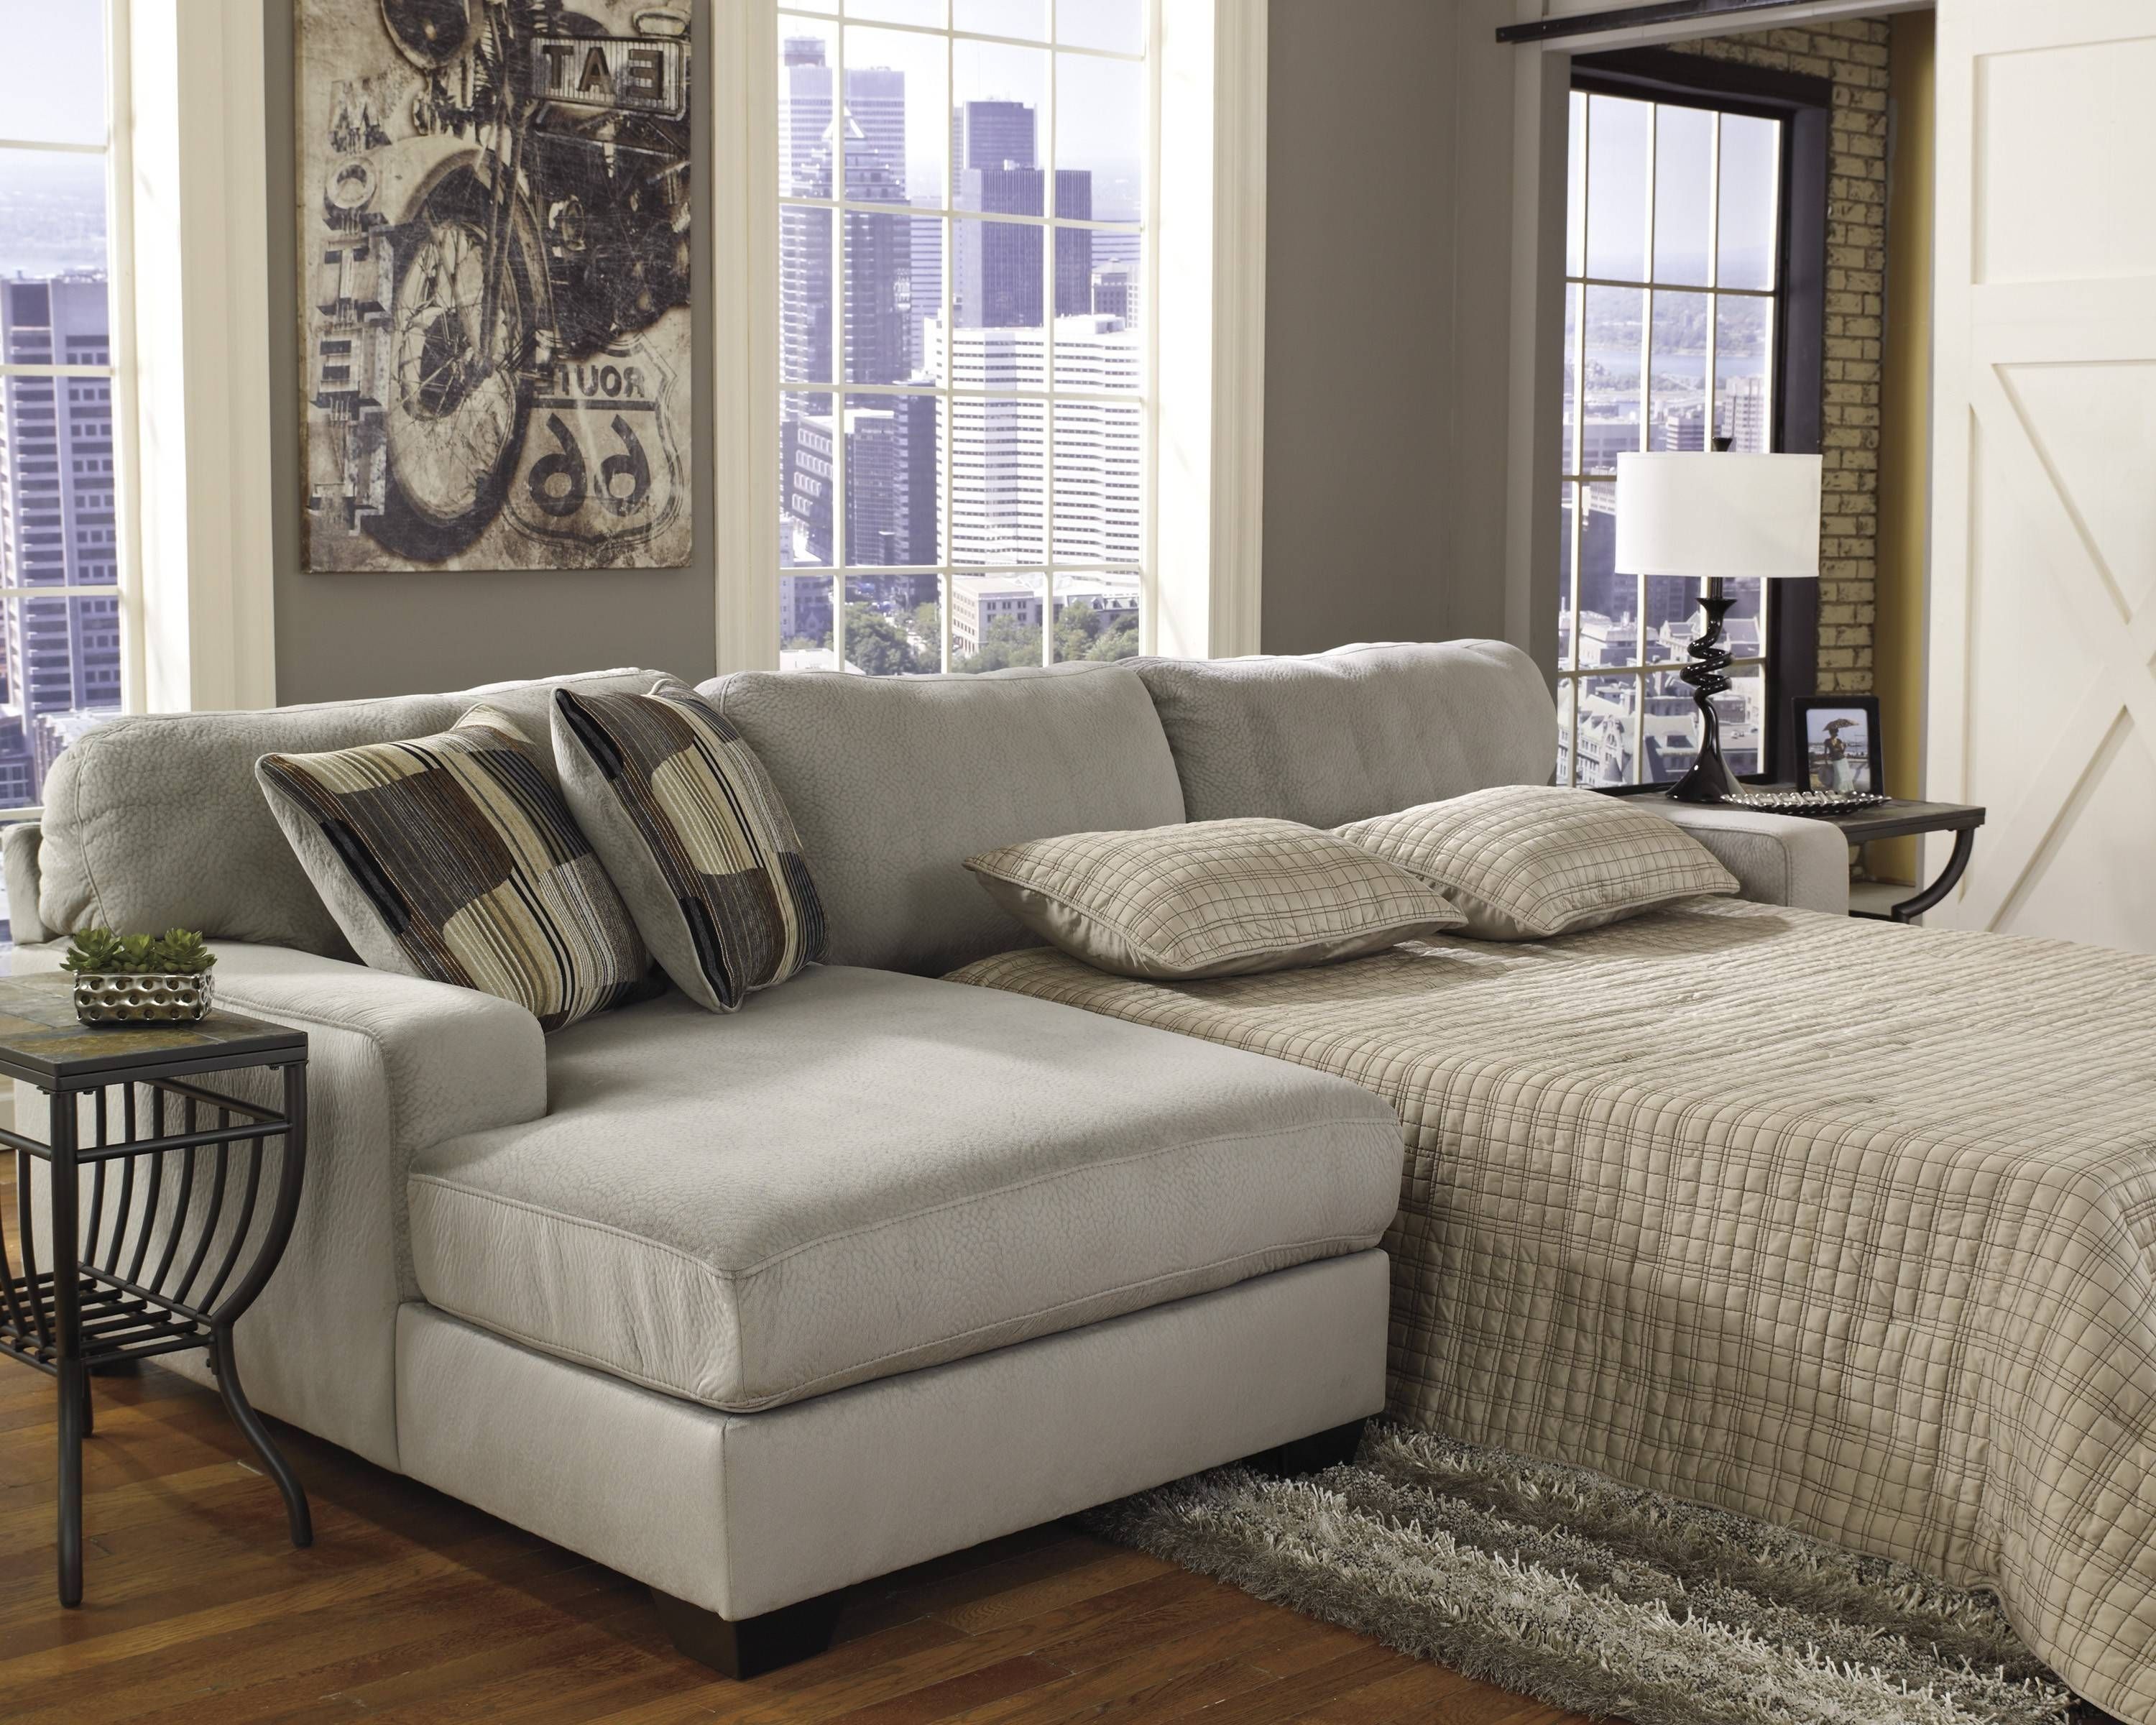 Interior: Luxury Oversized Sectional Sofa For Awesome Living Room Within Cozy Sectional Sofas (Photo 1 of 30)